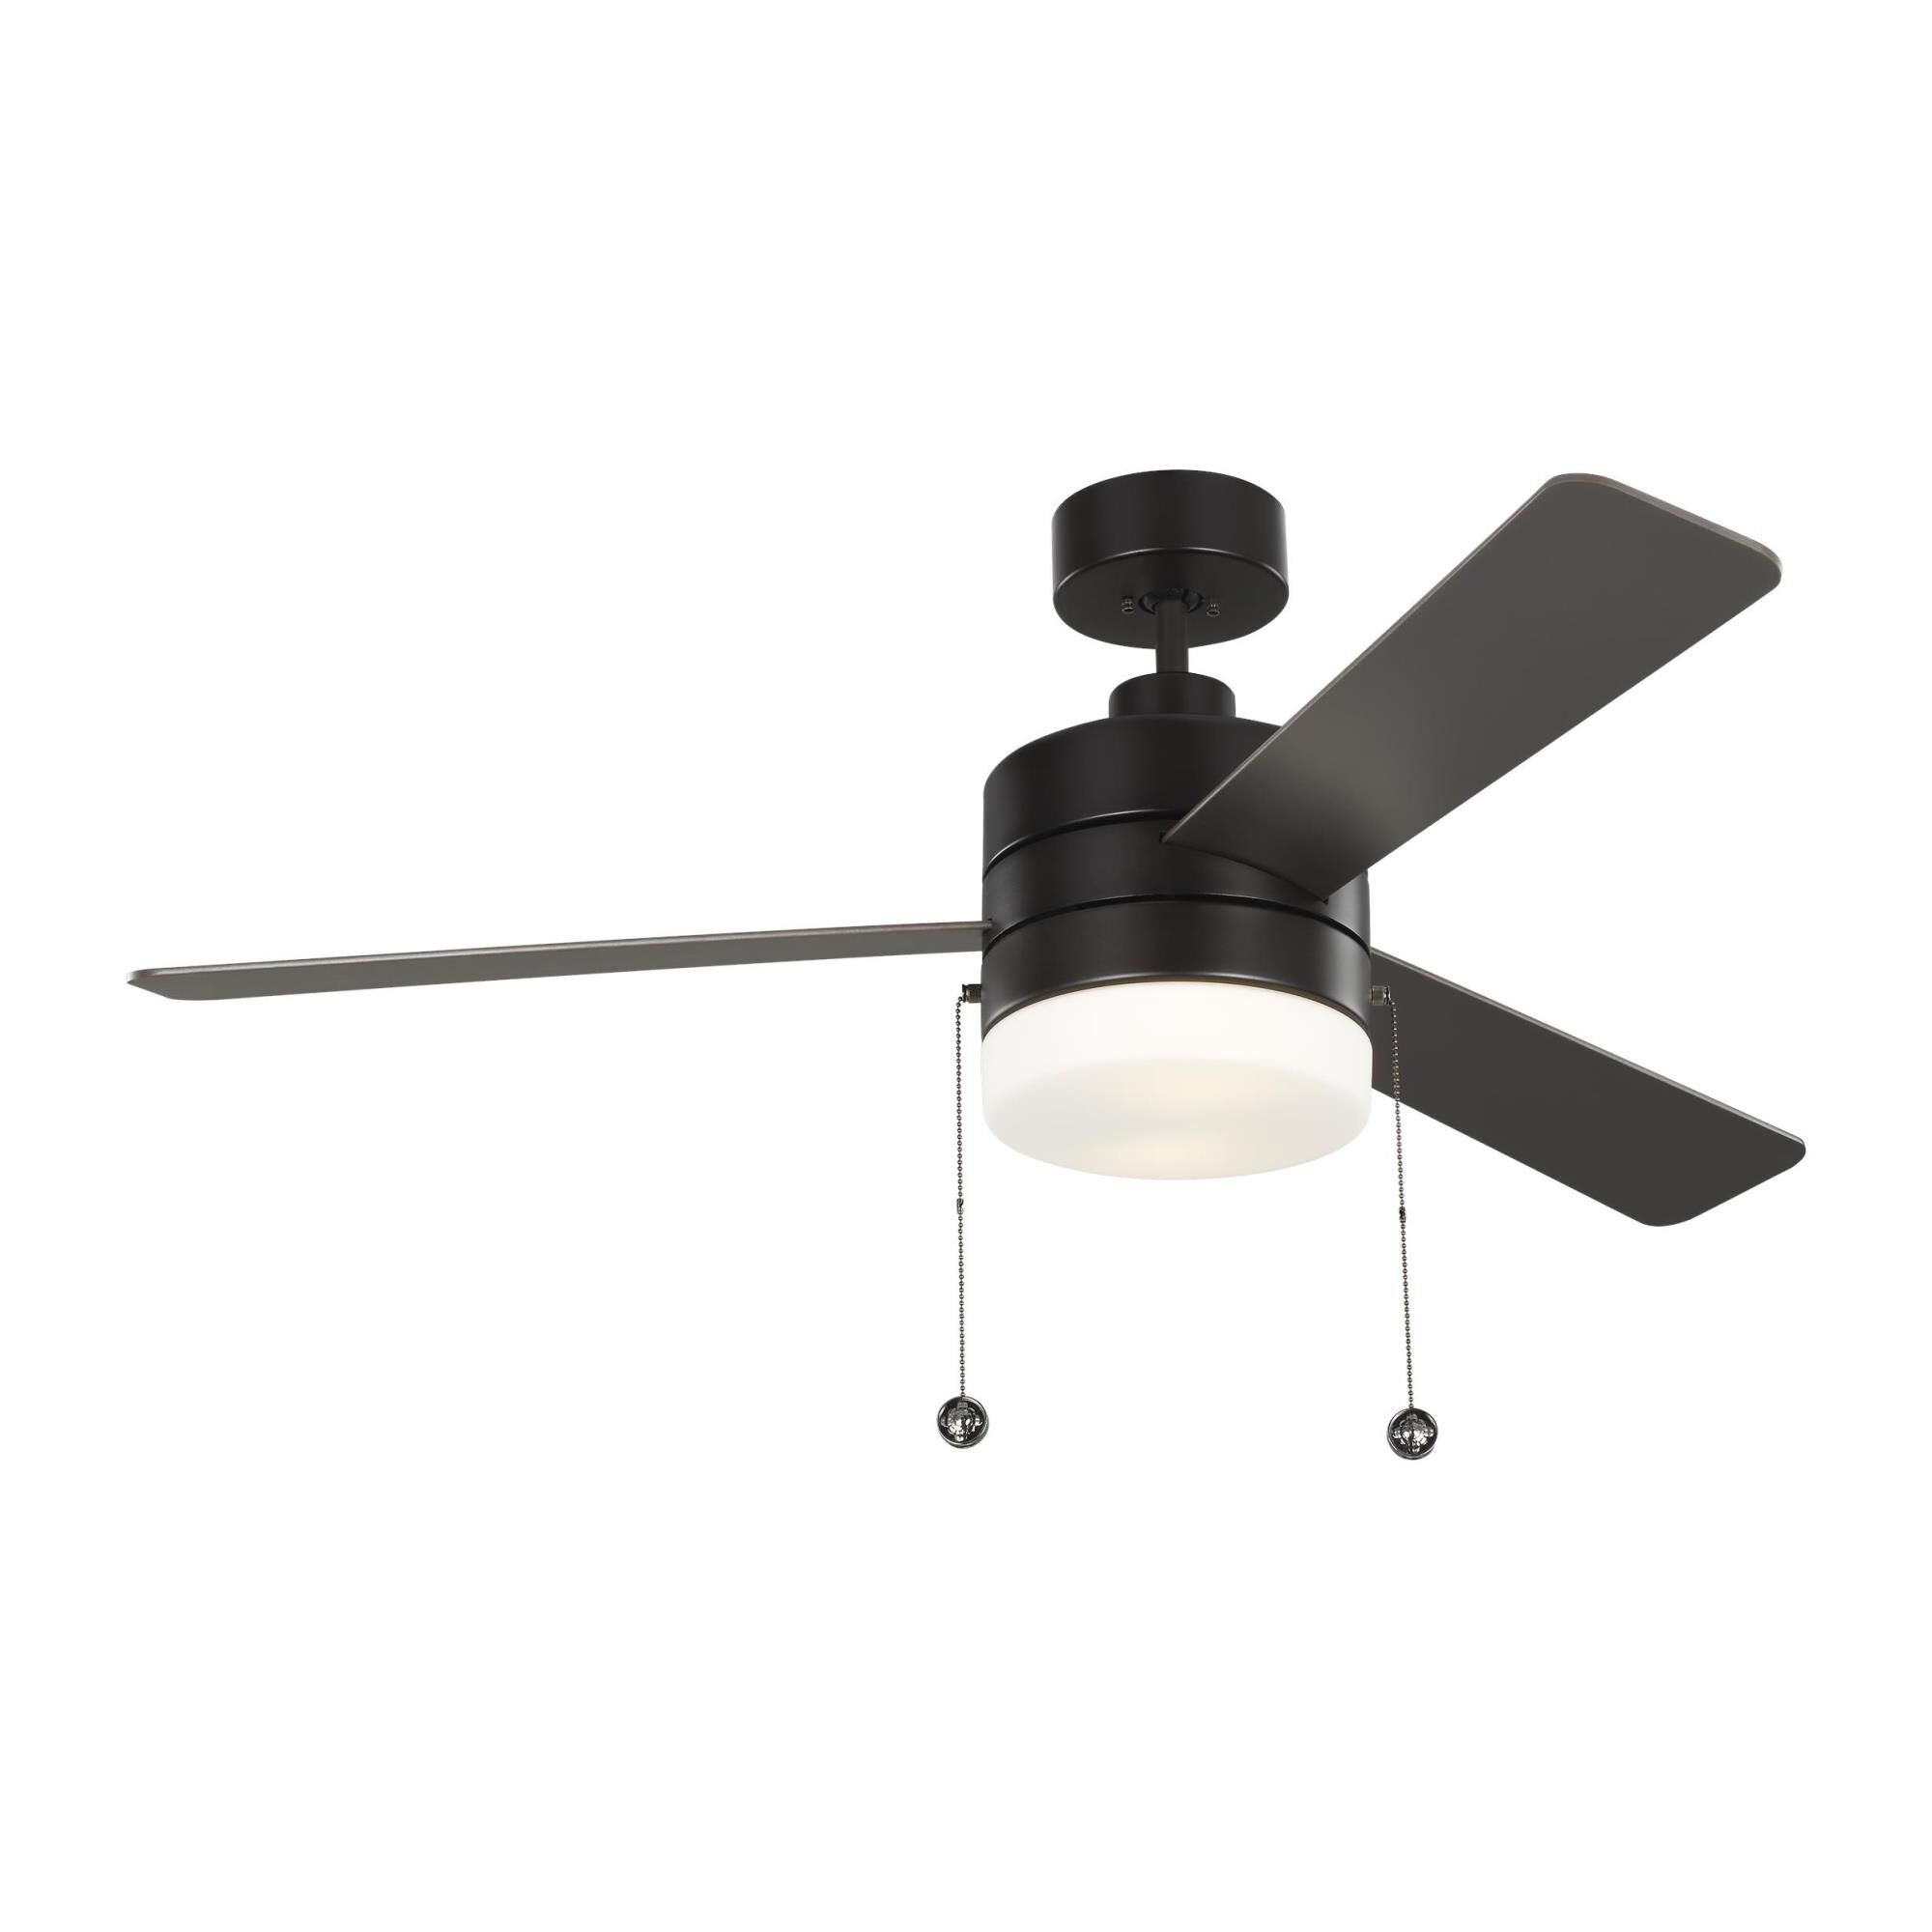 Photos - Fan Generation Lighting Syrus 52 Inch Ceiling  with Light Kit Syrus - 3SY52